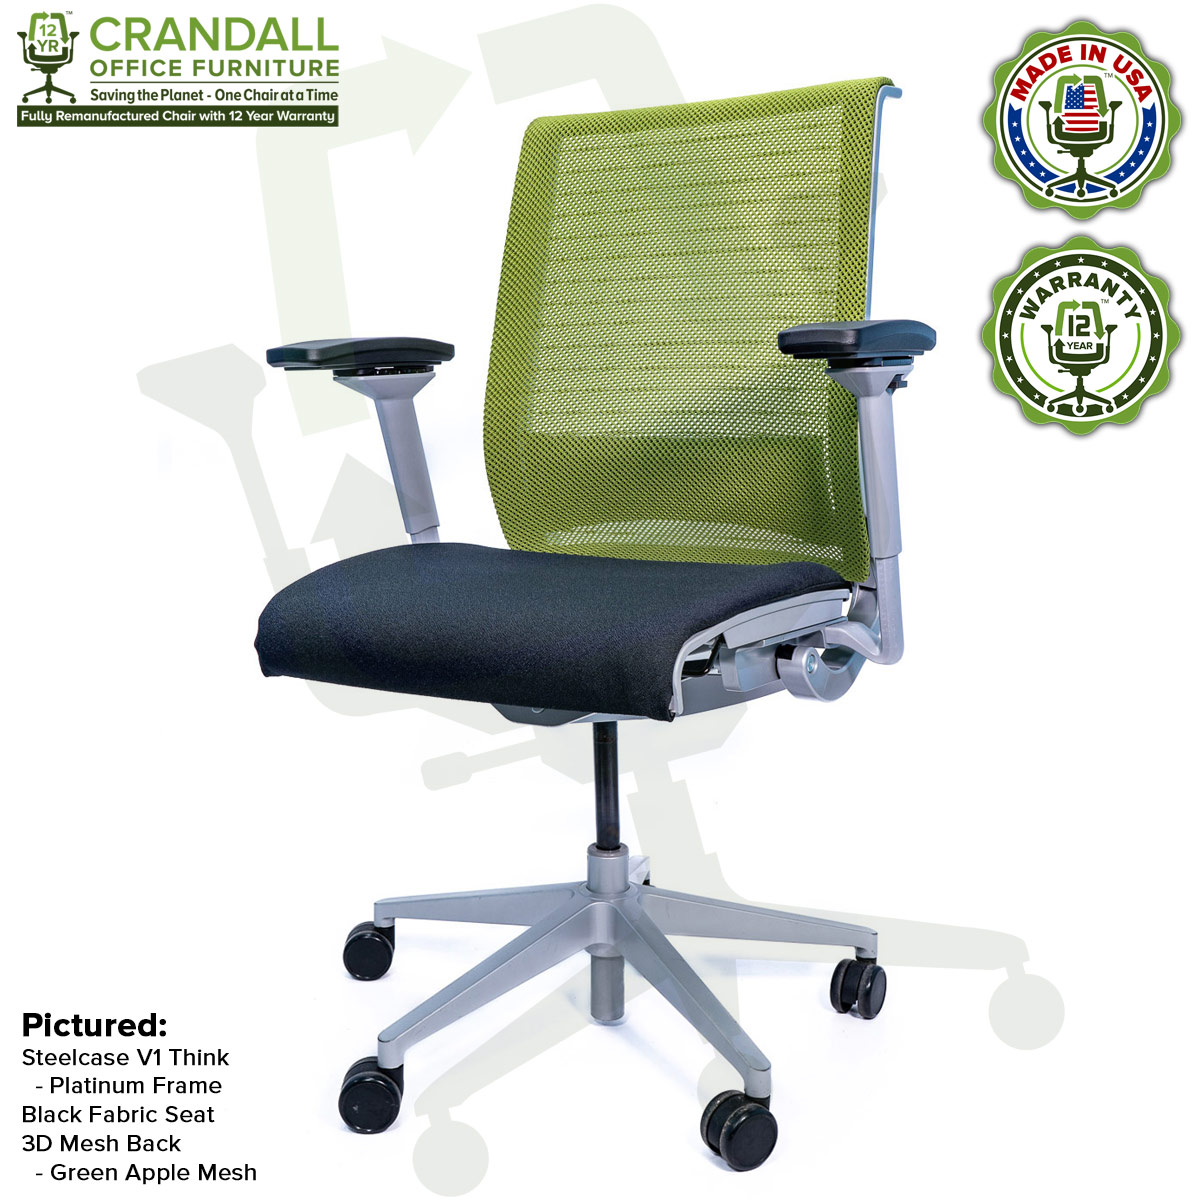 Crandall Office Furniture Remanufactured Steelcase Think Chair with 12 Year Warranty - Platinum Frame - Green Apple Mesh